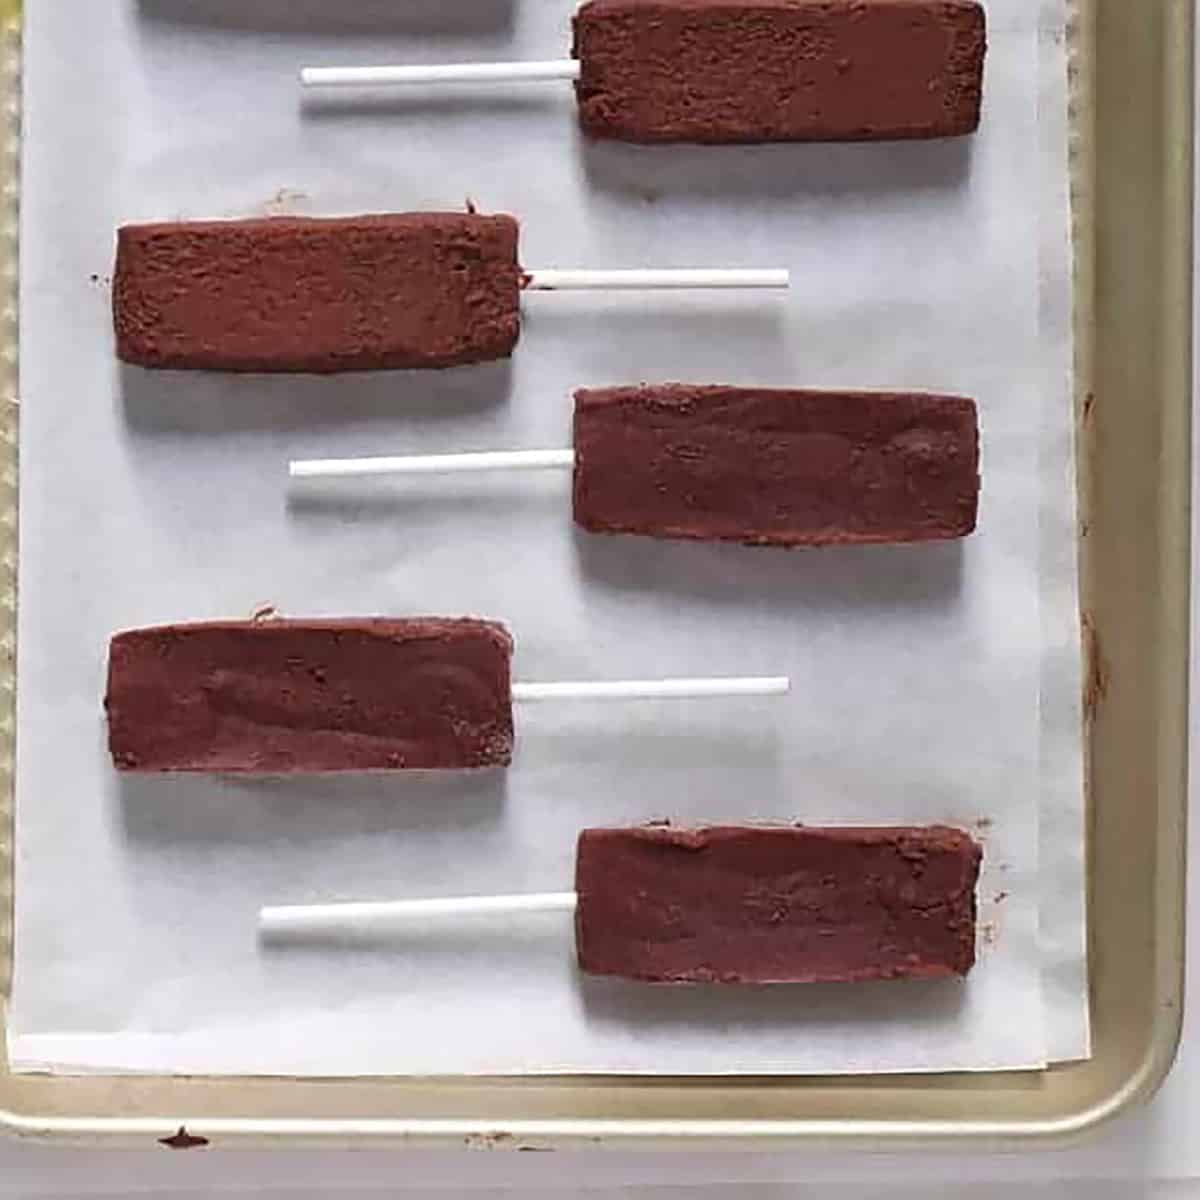 mars bars on a tray with lollipop sticks.